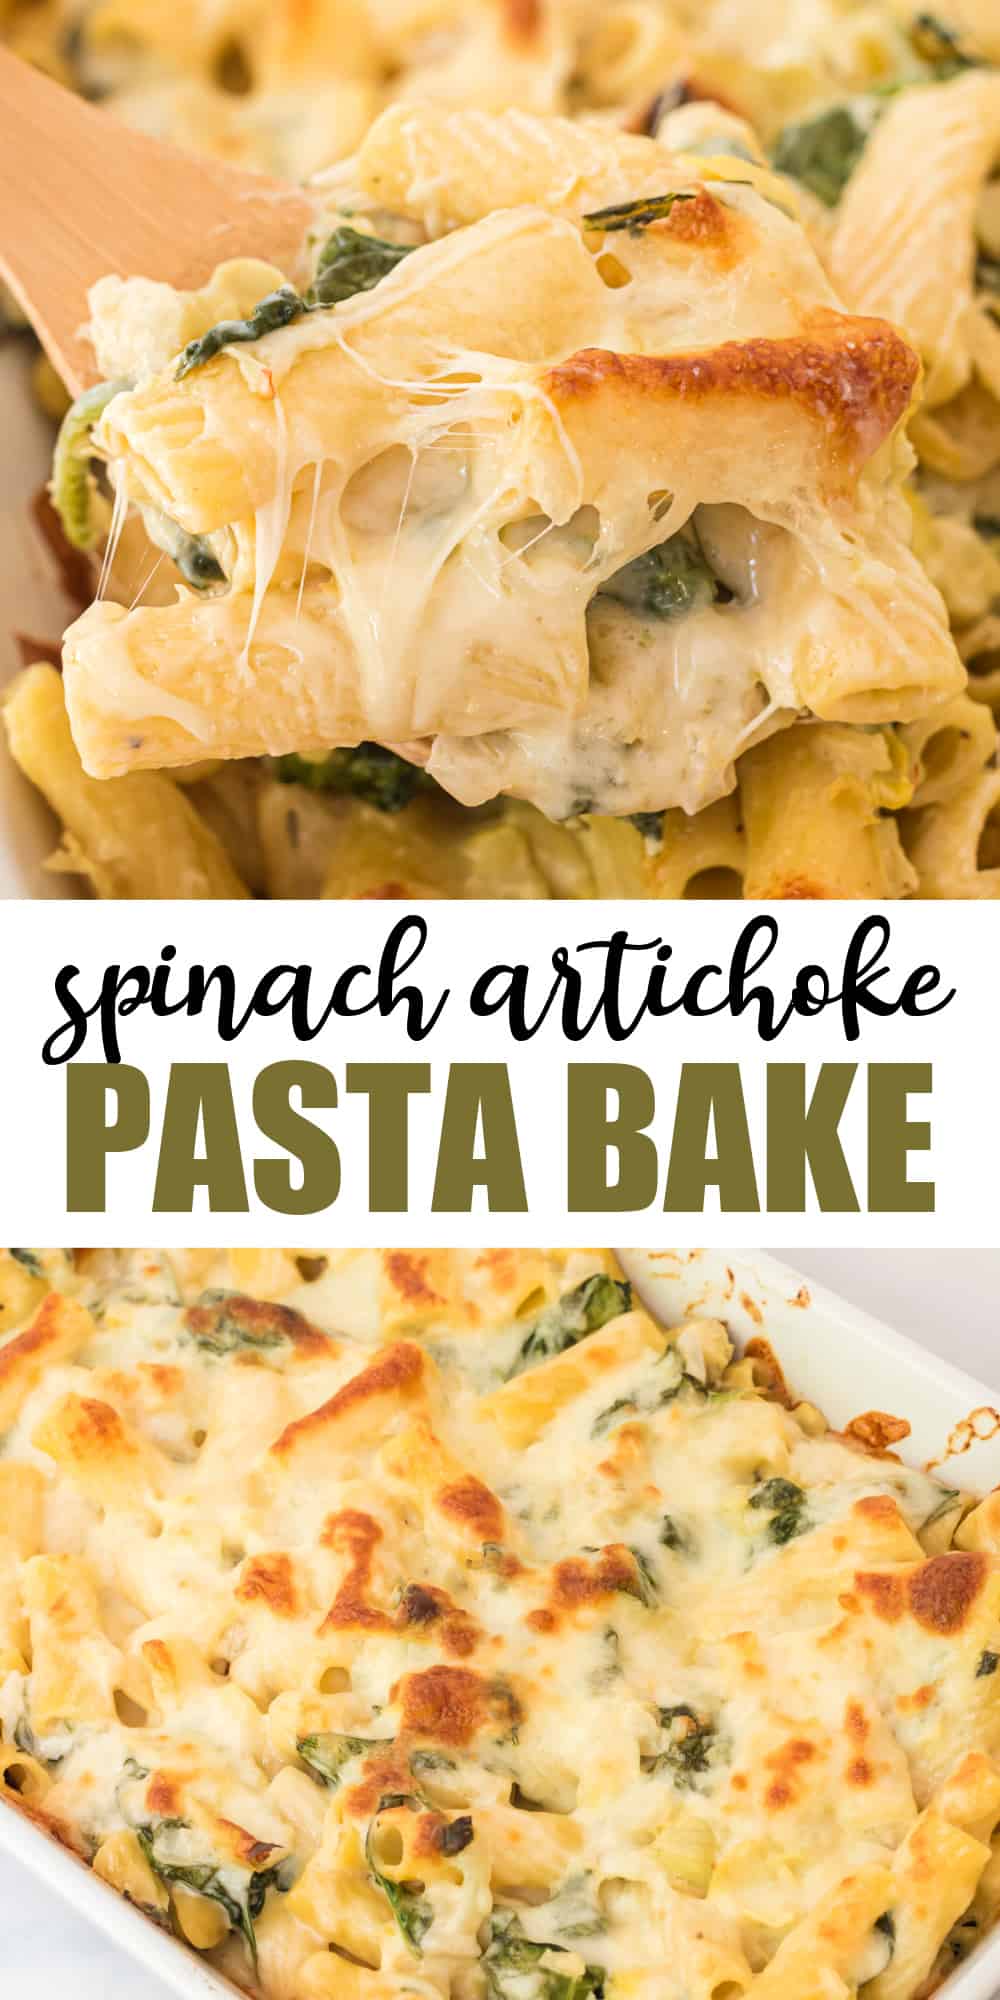 image with text "spinach artichoke pasta bake"